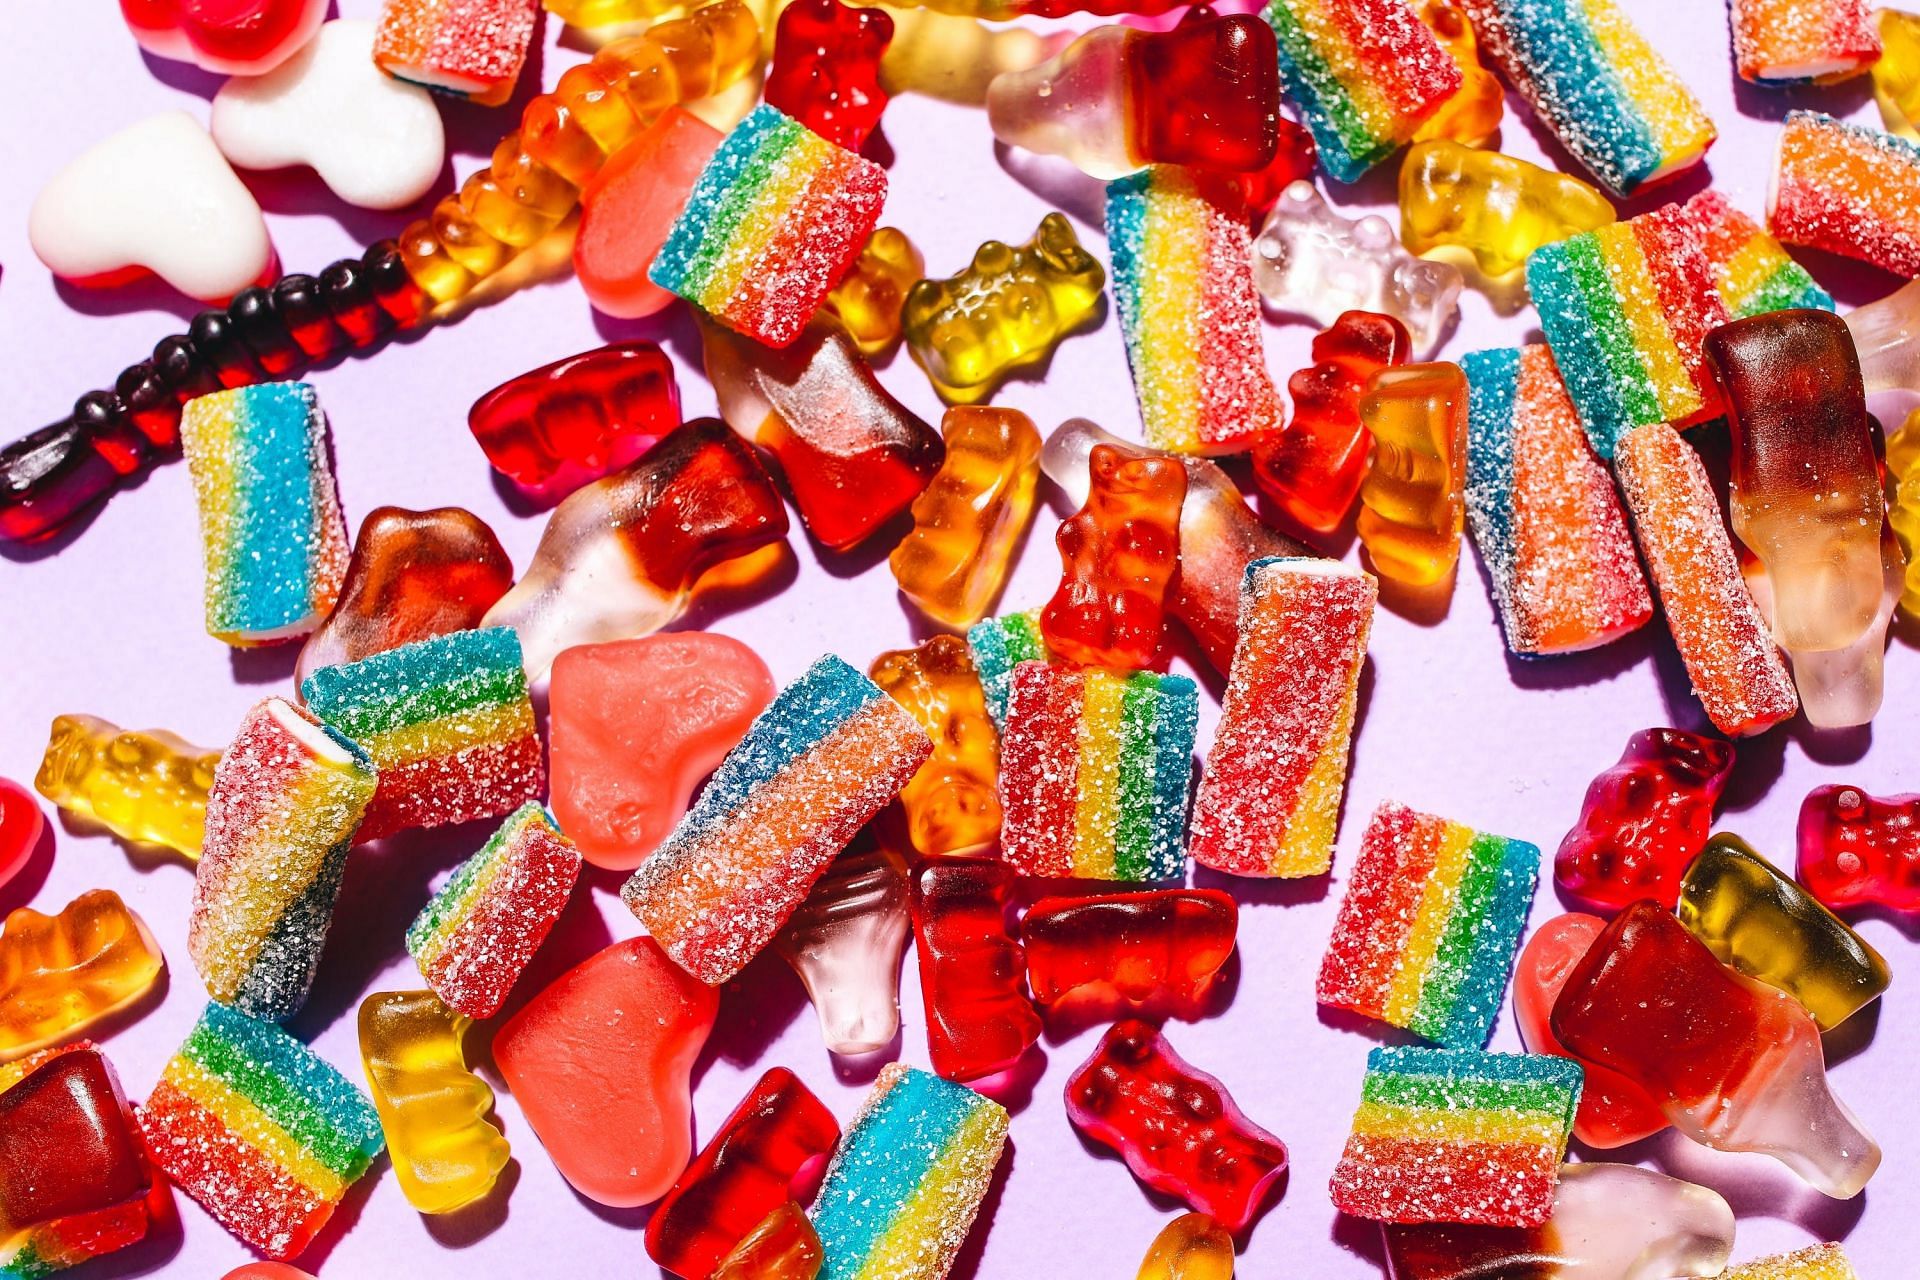 Importance of avoiding sugar for headaches (image sourced via Pexels / Photo by Polina)